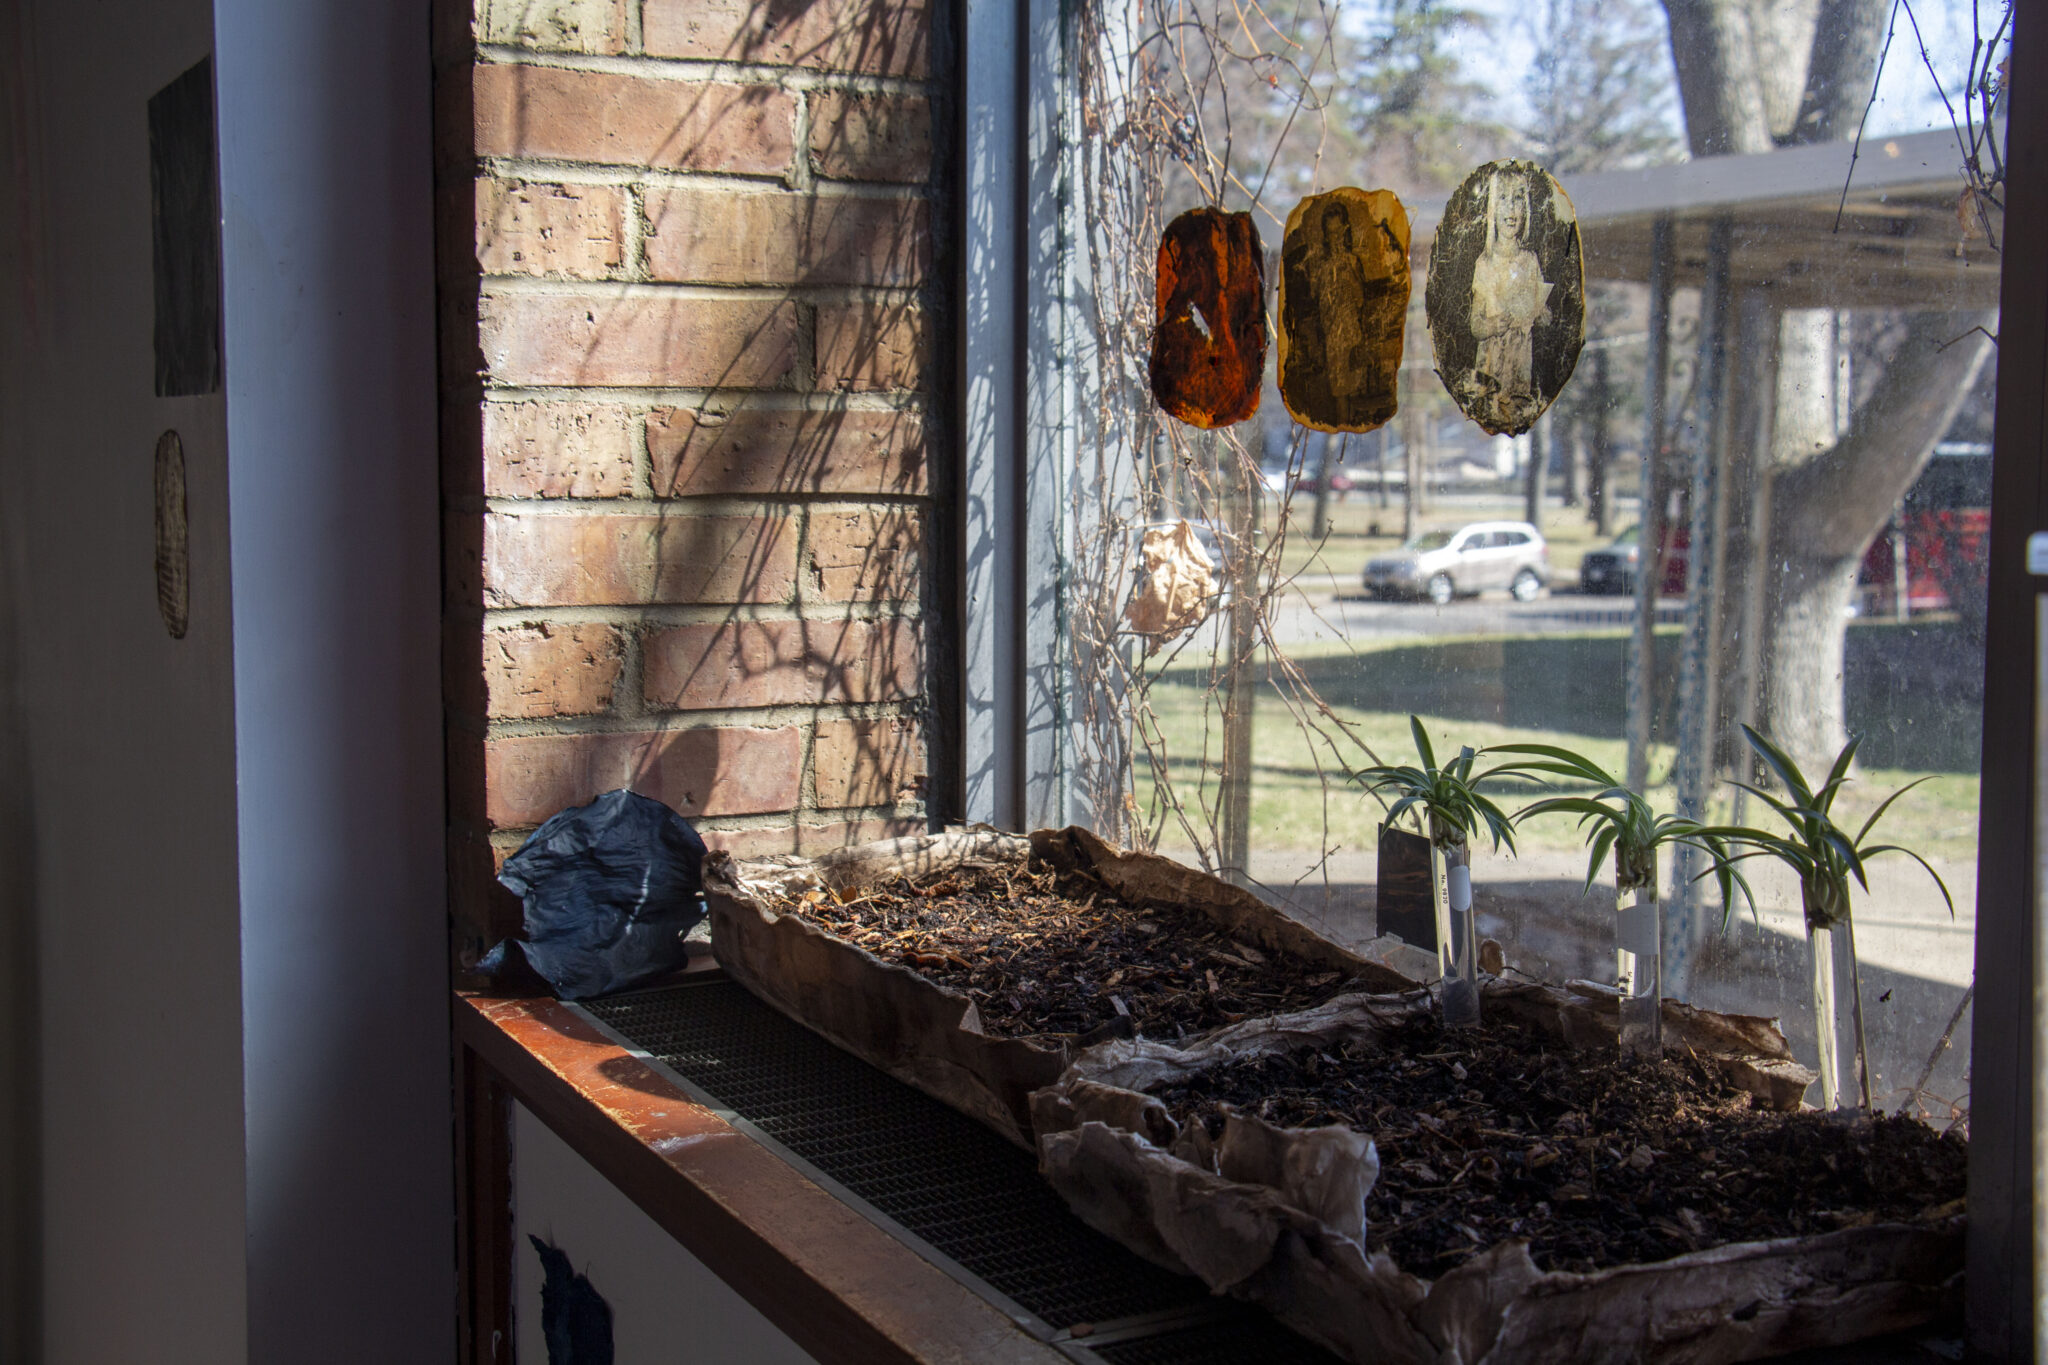 Photo of Alexis Schramel's thesis installation. Planters with small green spouts sit on the sill of a large window next to a brick wall. On the window, there are thin sheets of material, SCOBY, with images of the artist's family members printed onto them.